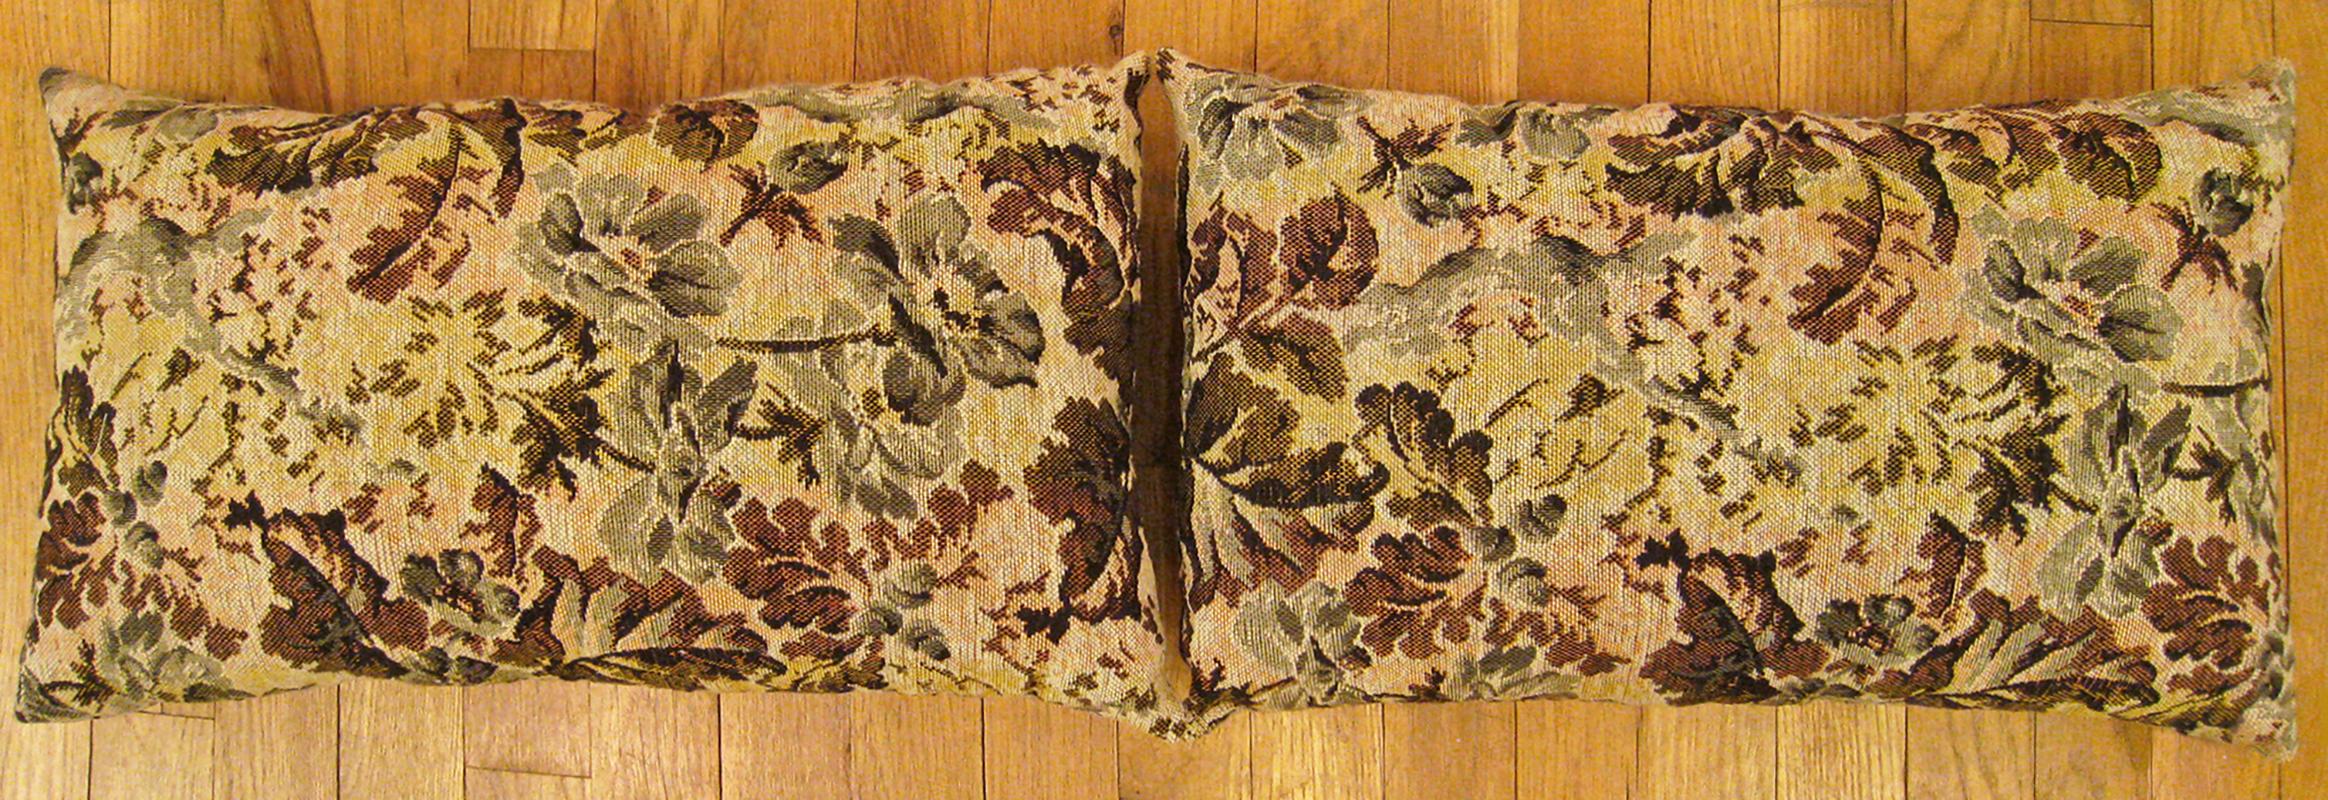 A pair of antique Jacquard Tapestry pillows ; size 1'0” x 1'8” each. 

An antique decorative pillows with floral elements allover a light shrimp central field, size 1'0